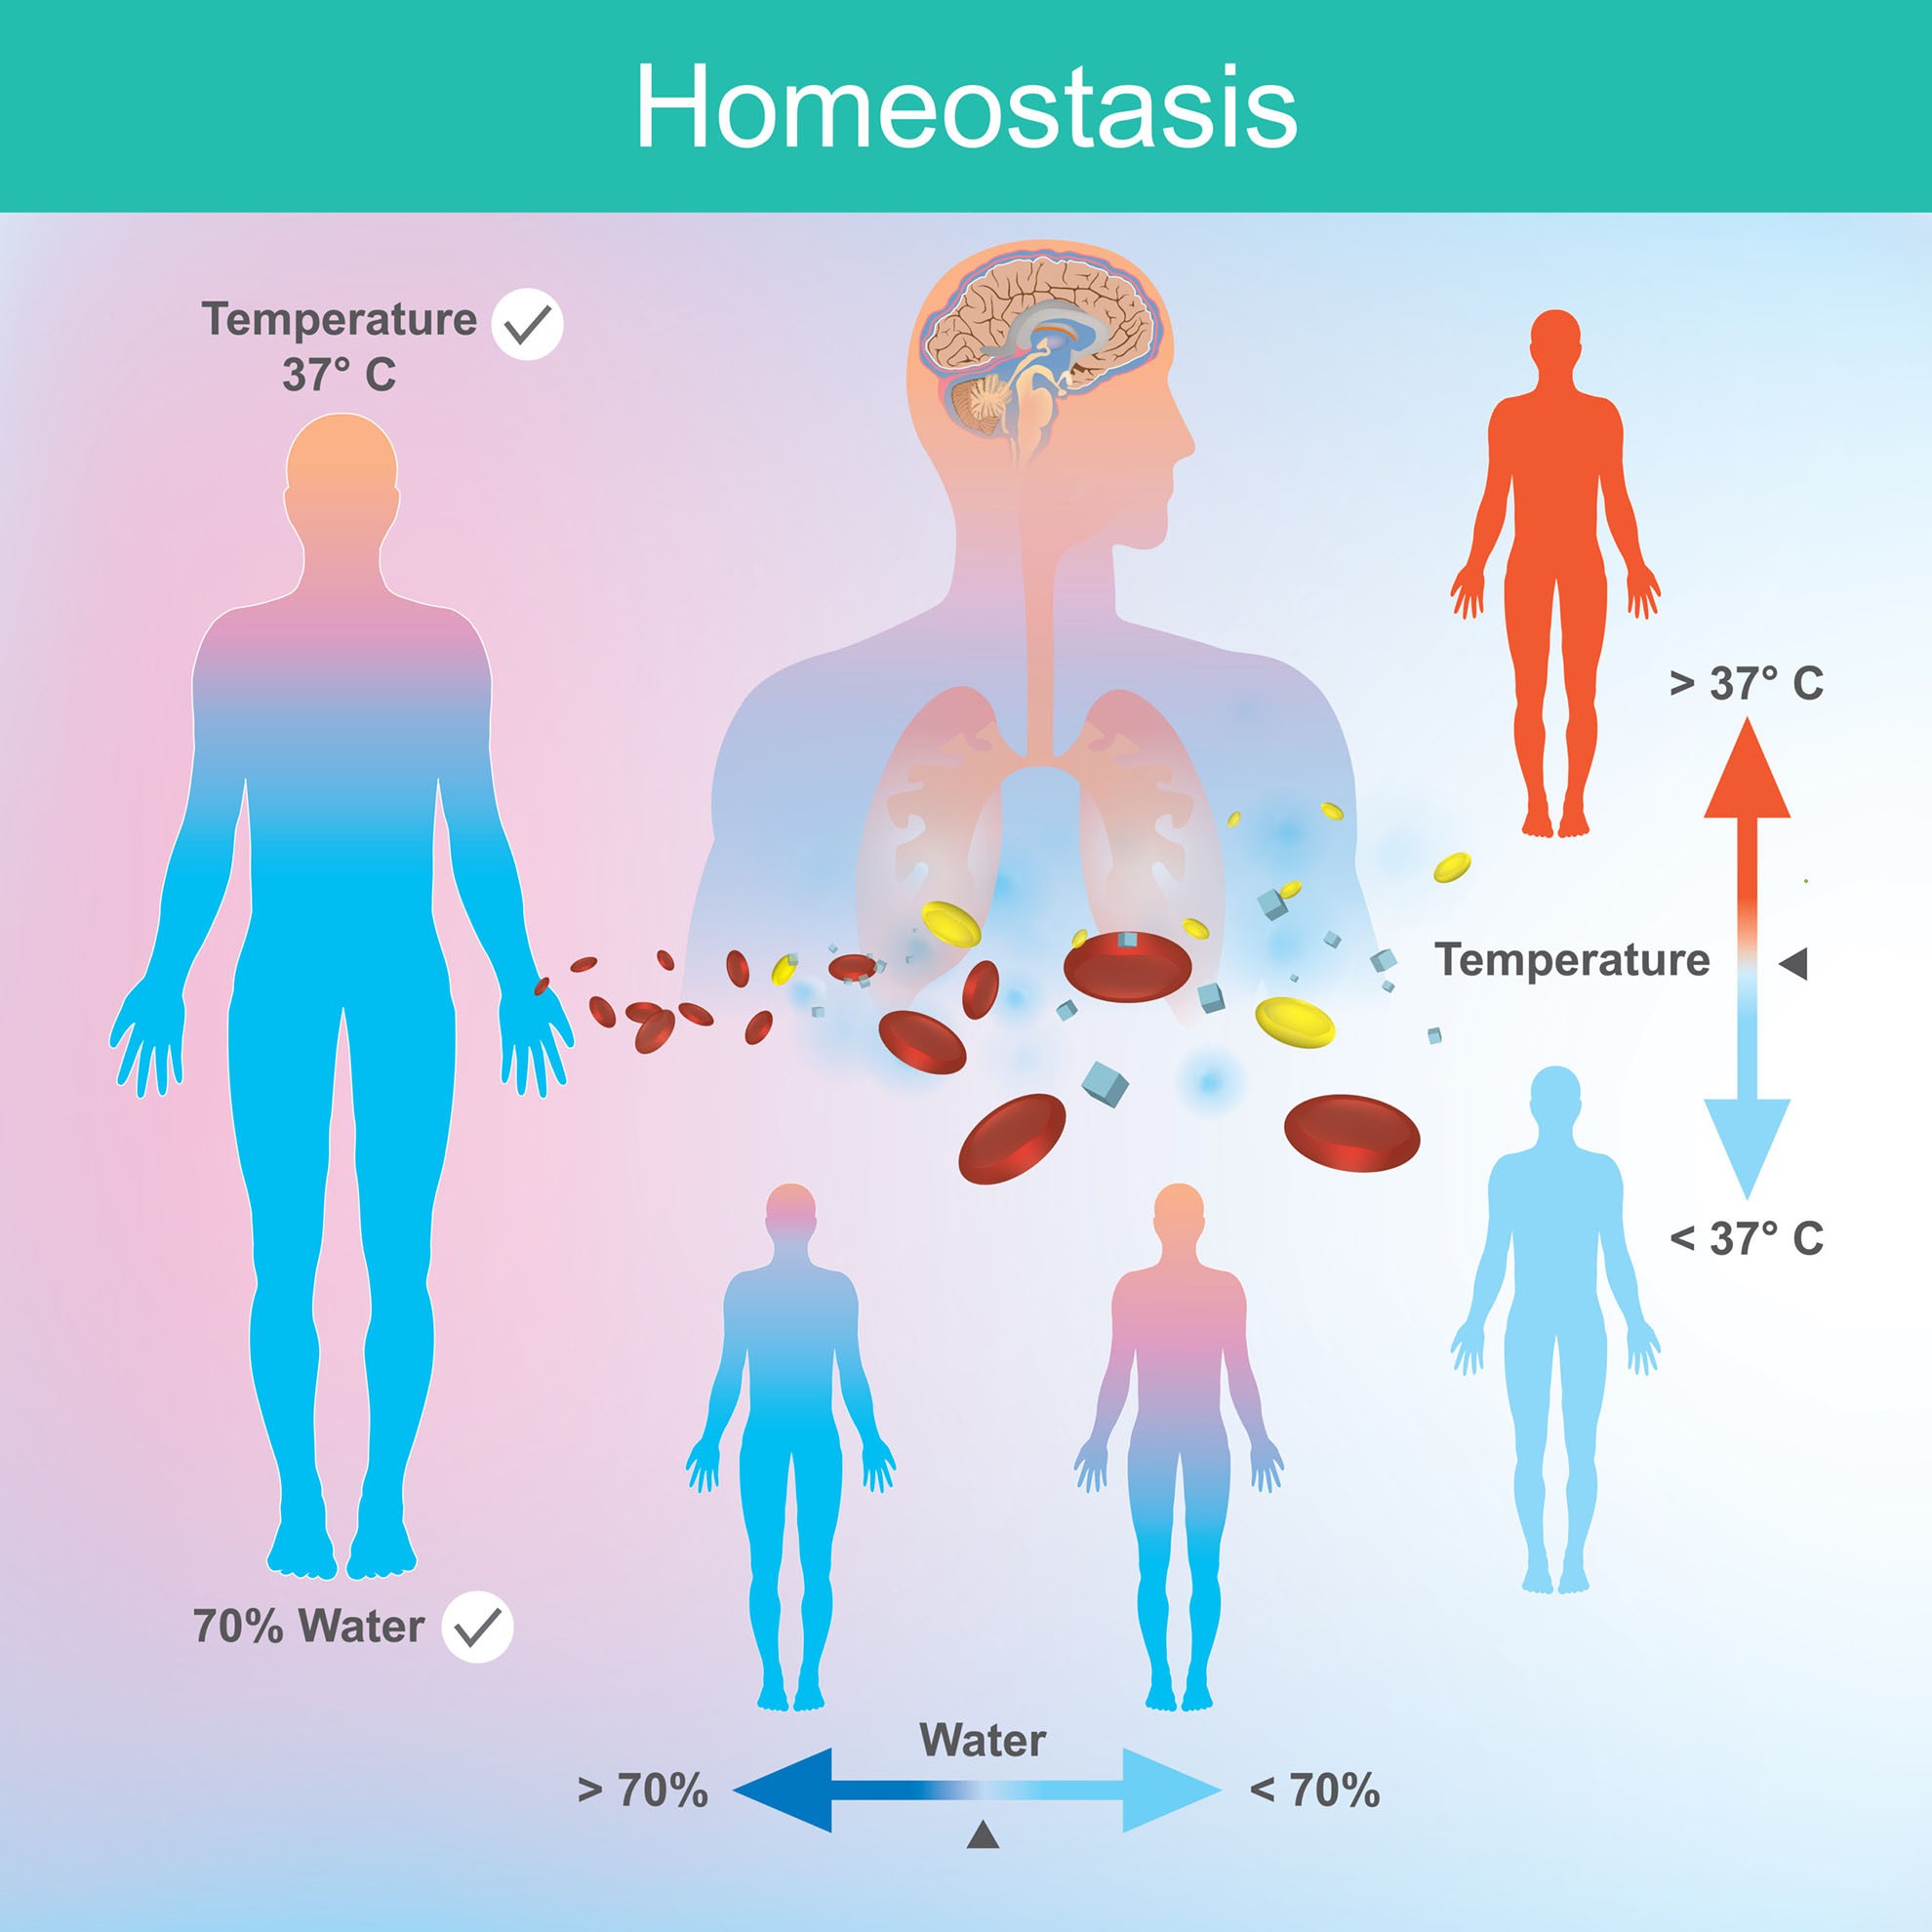 essay about the importance of homeostasis within the human body